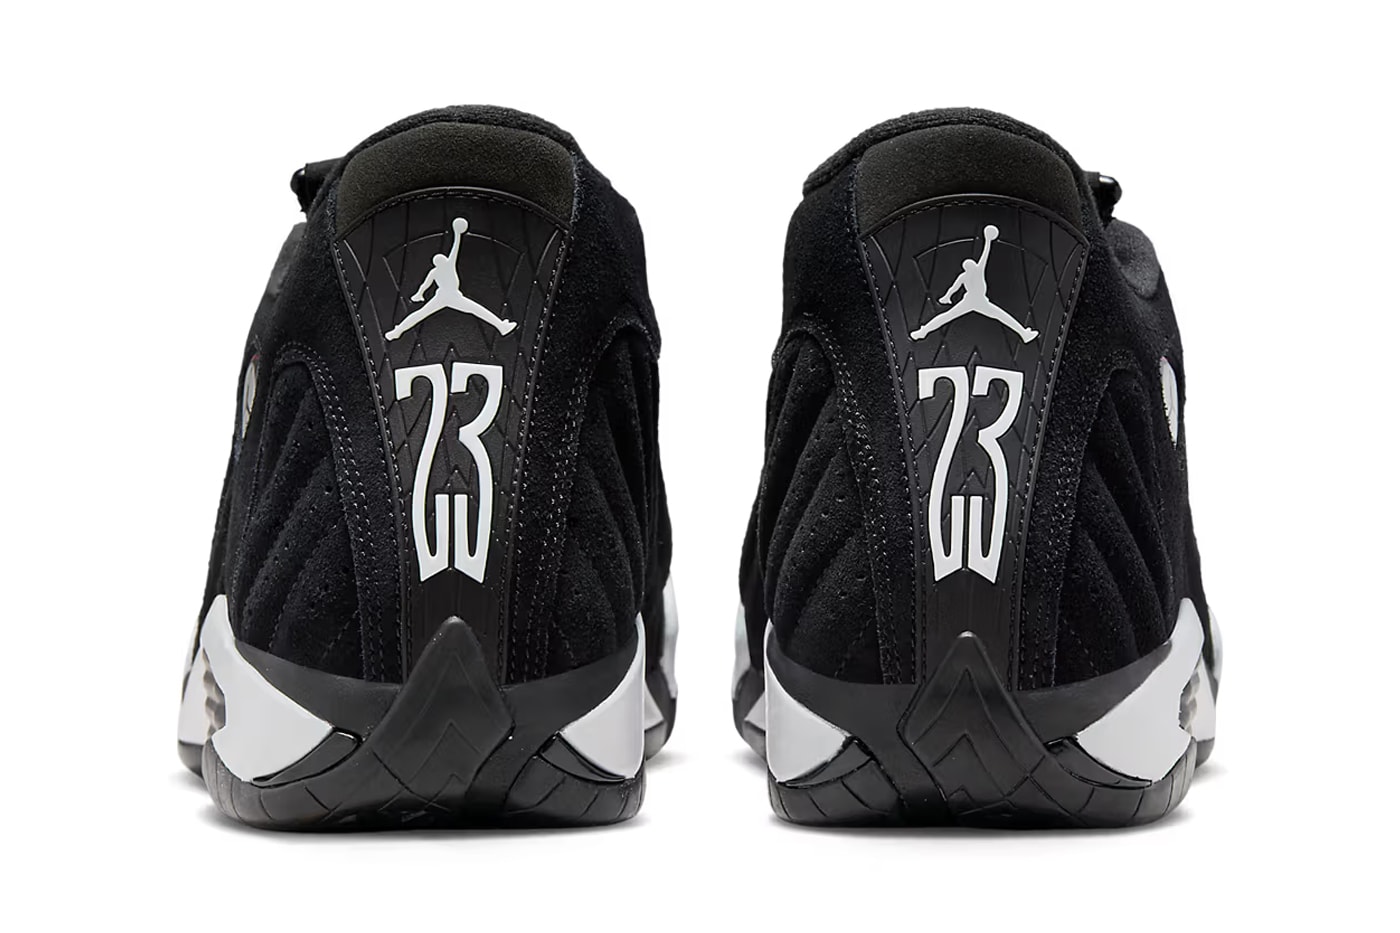 Air Jordan 14 Black White 487471-016 Release Date info store list buying guide photos price